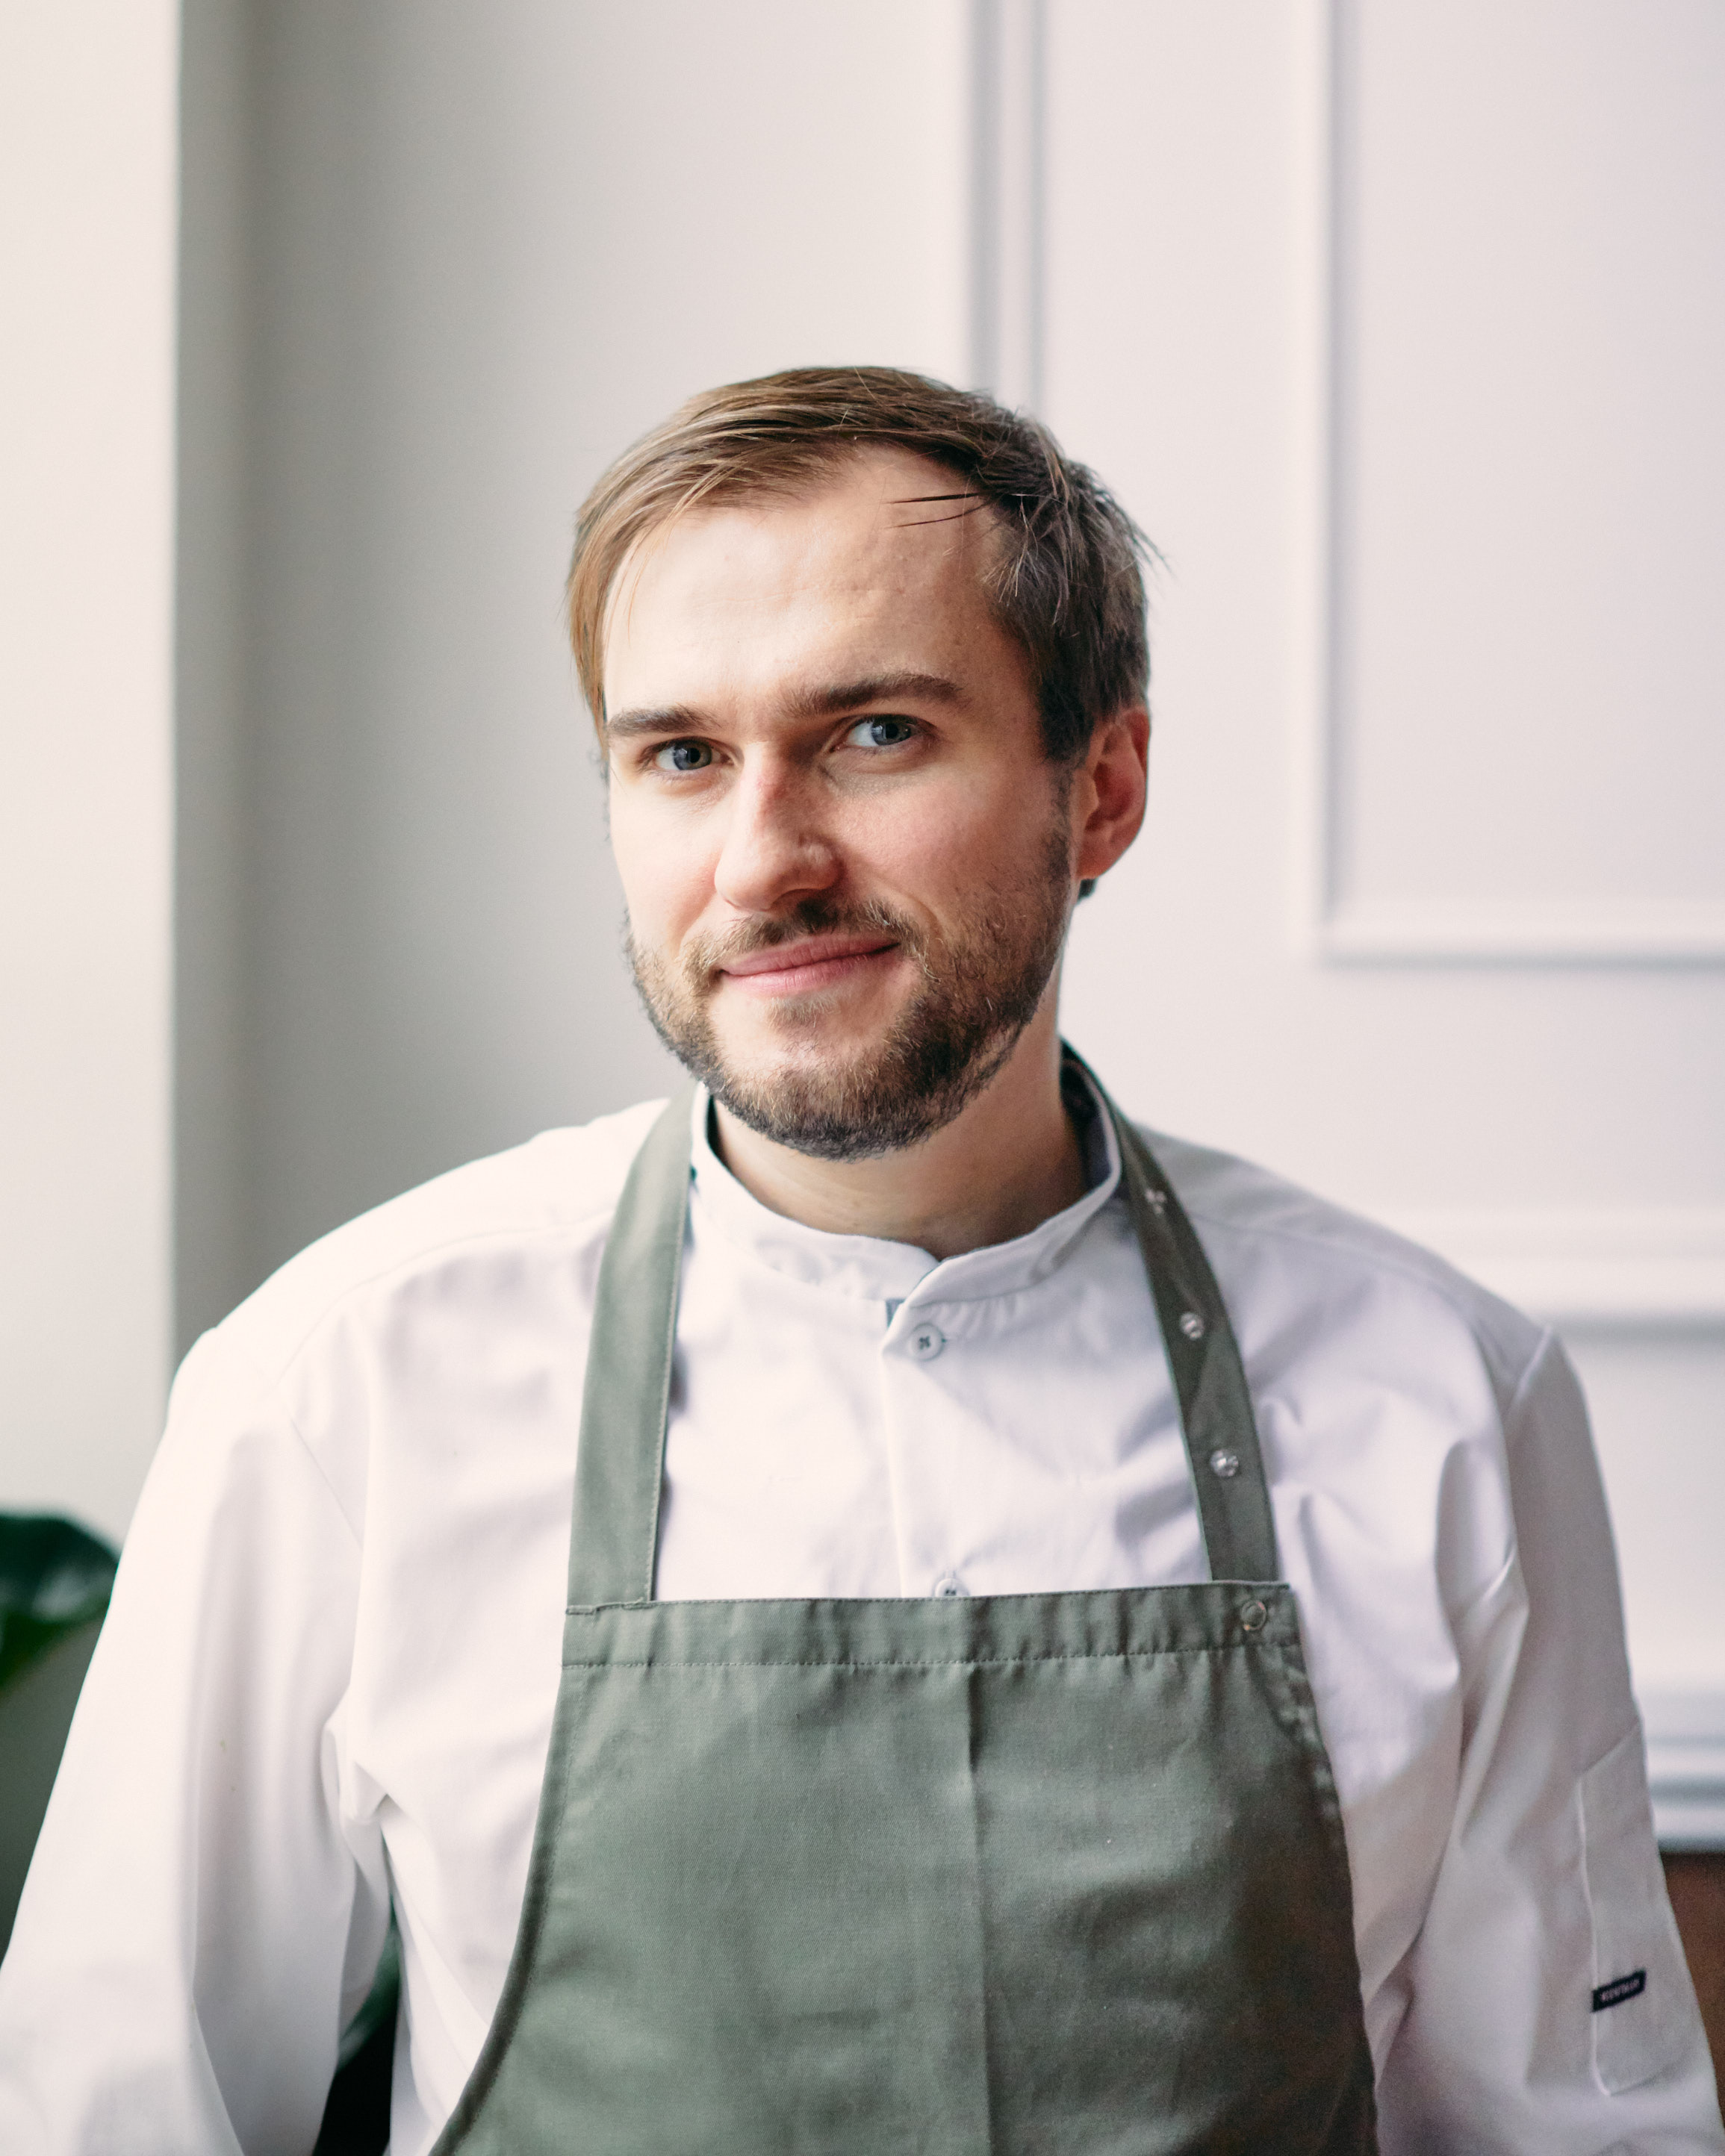 Omnia Bistro & Bar Chef Stephen Nairn. Photographed by Harvard Wang. Image supplied